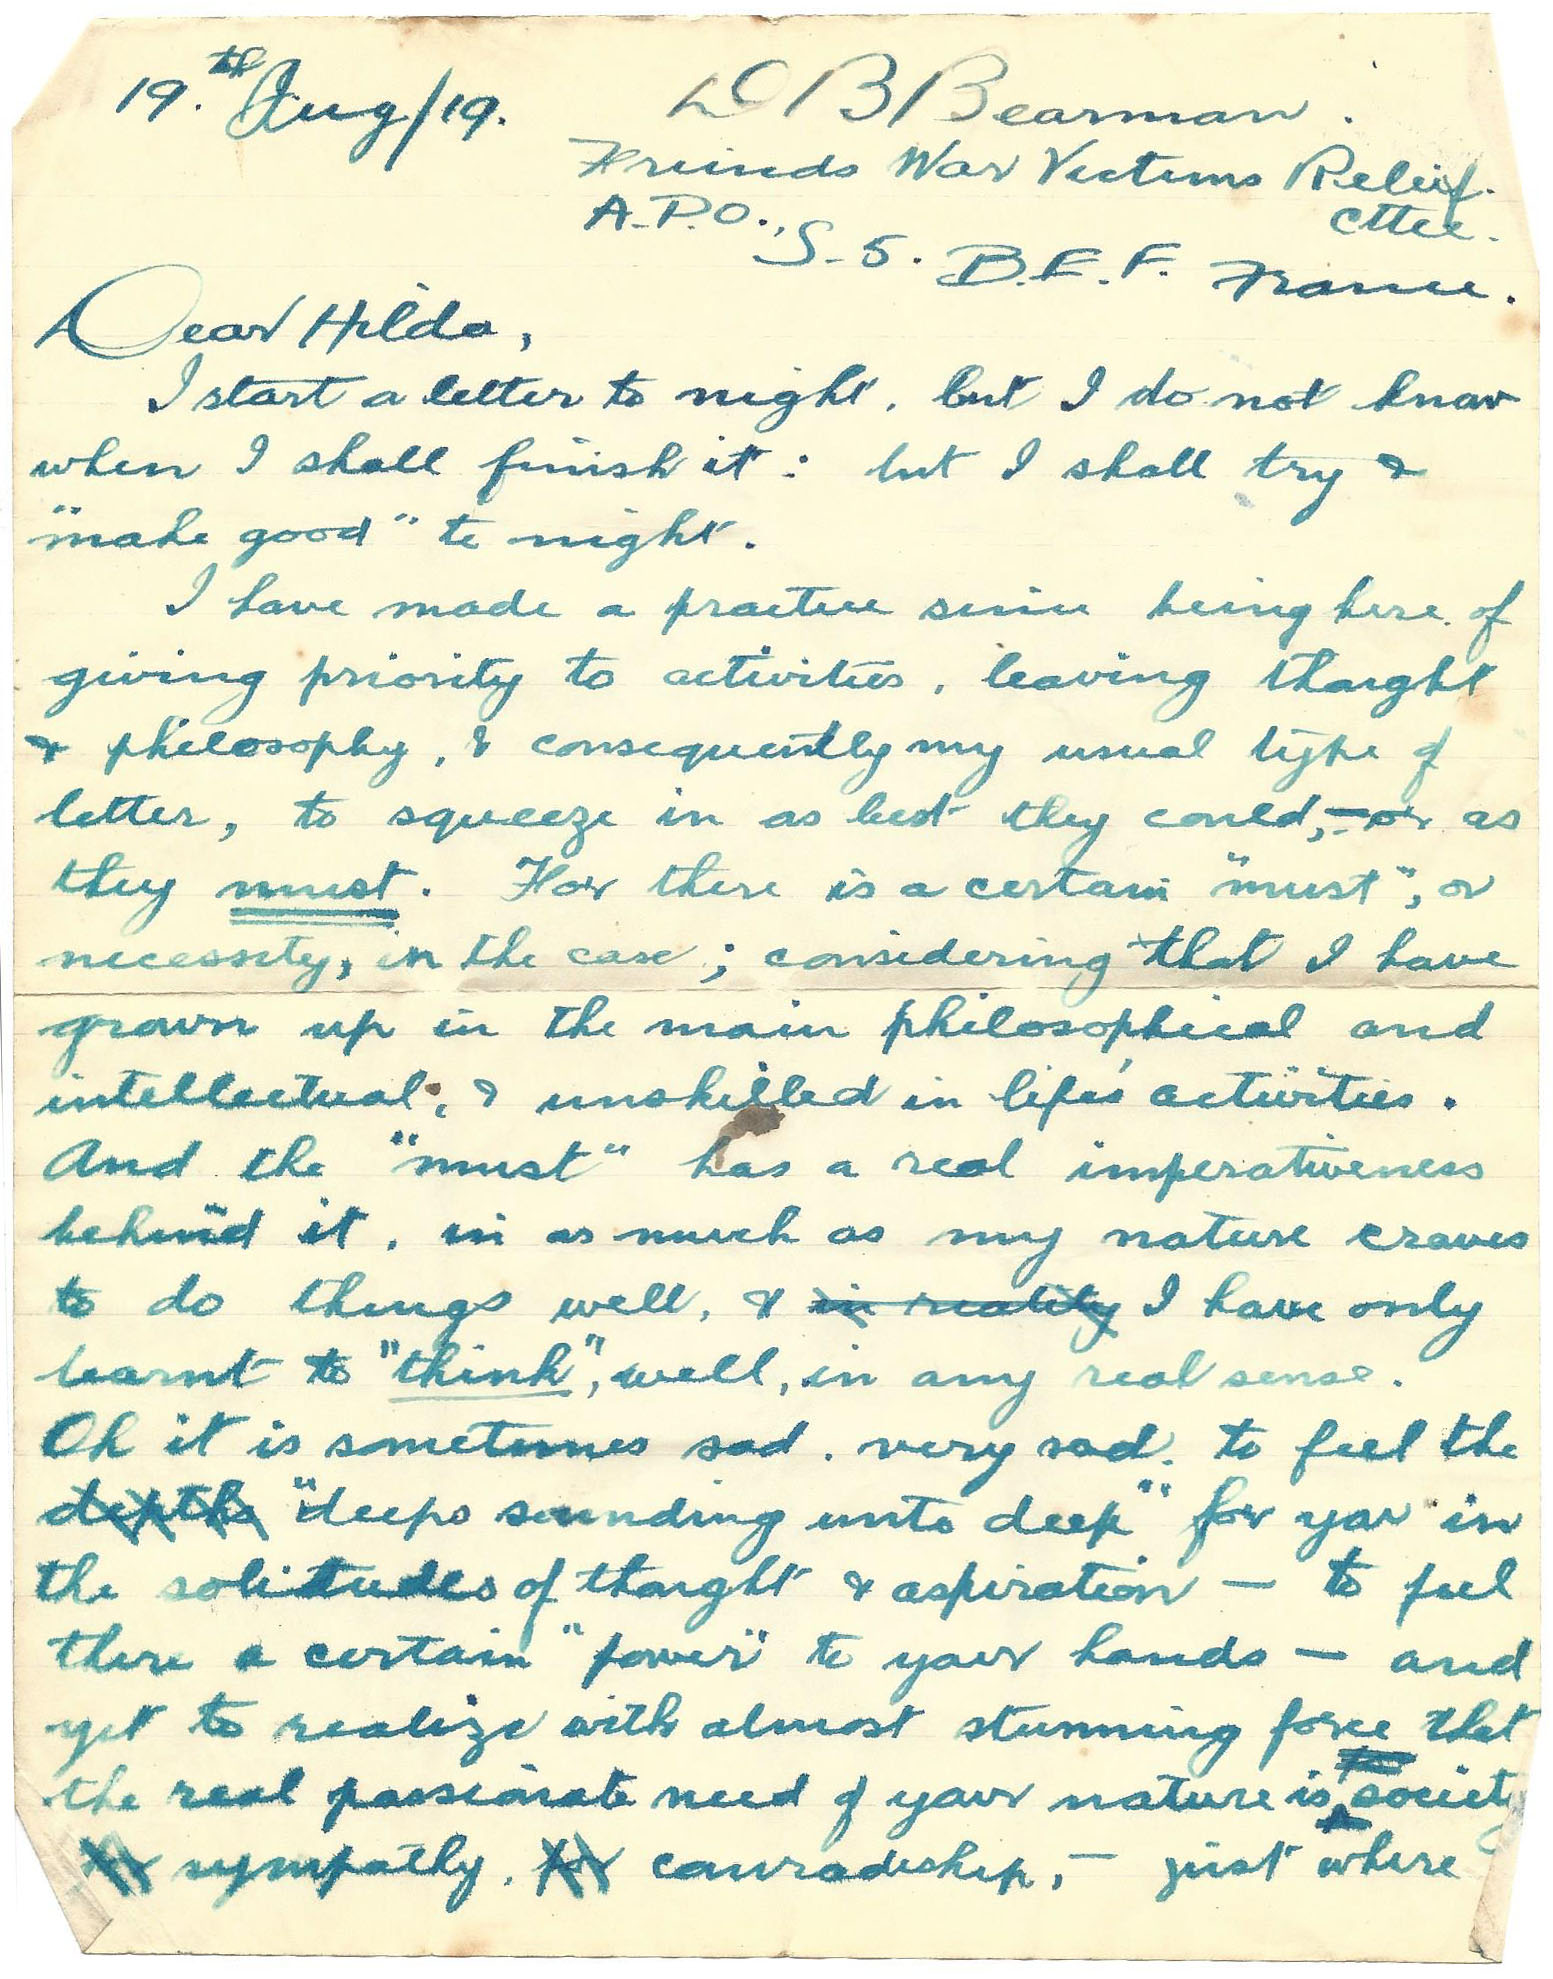 1919-08-19 p1 Donald Bearman letter to his father